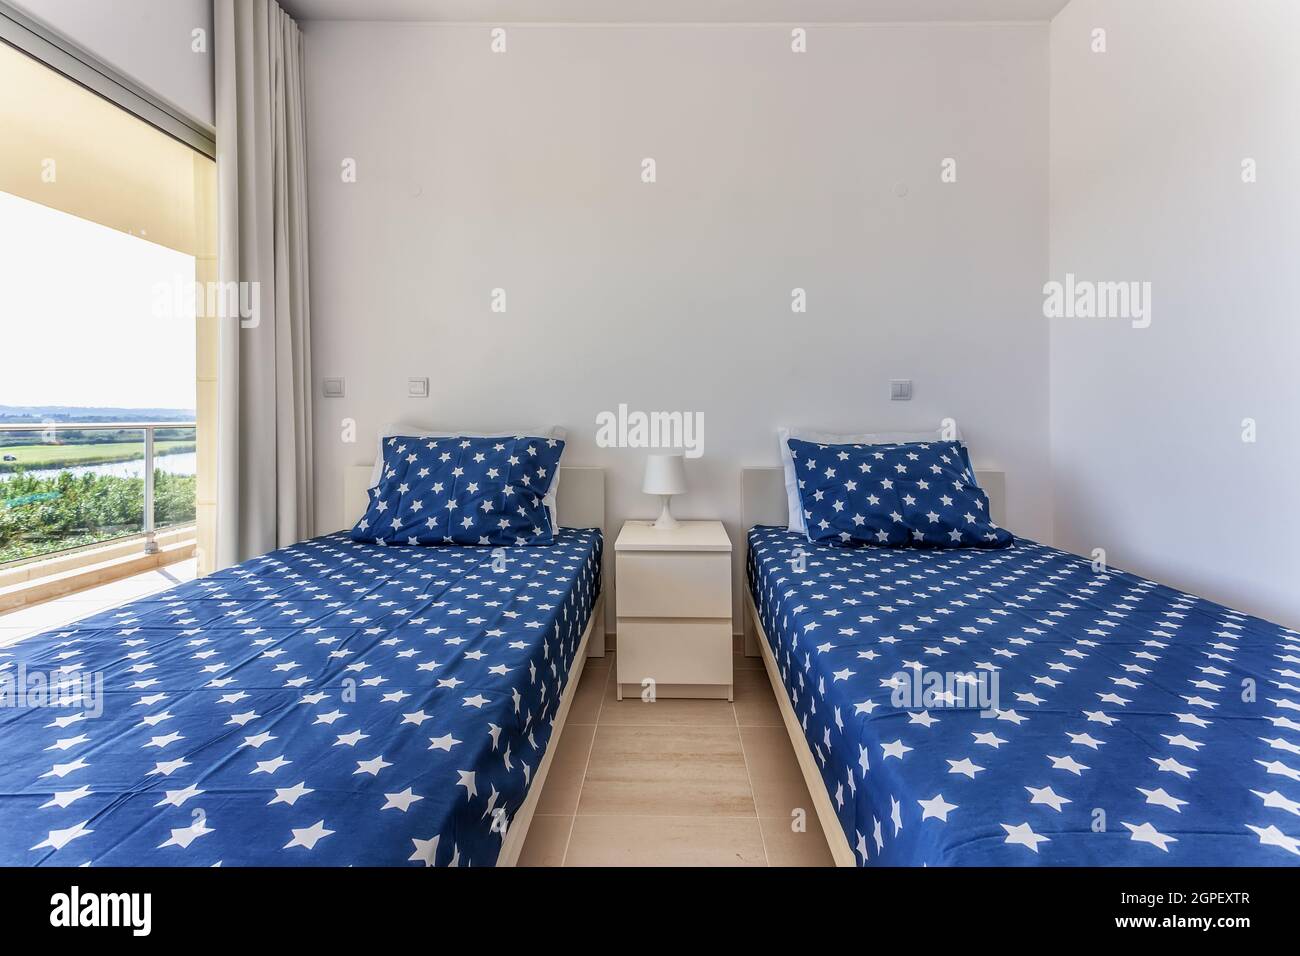 The interior of a traditional bedroom, with two beds covered with blue bedspreads with stars. Stock Photo